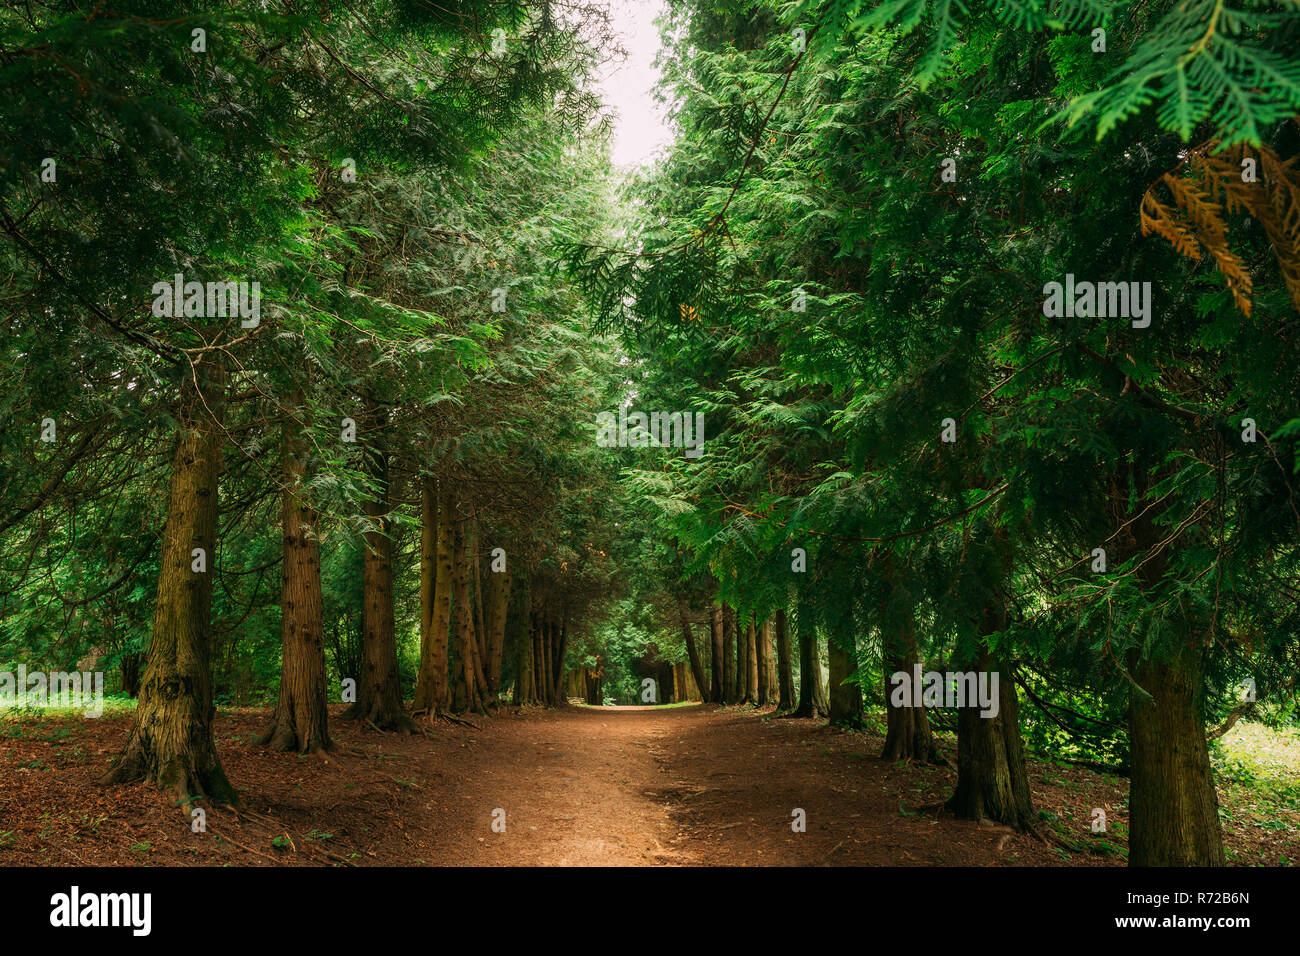 Walkway Lane Path Through Green Thuja Coniferous Trees In Forest. Beautiful Alley, Road In Park. Pathway, Natural Tunnel, Way Through Summer Forest. T Stock Photo